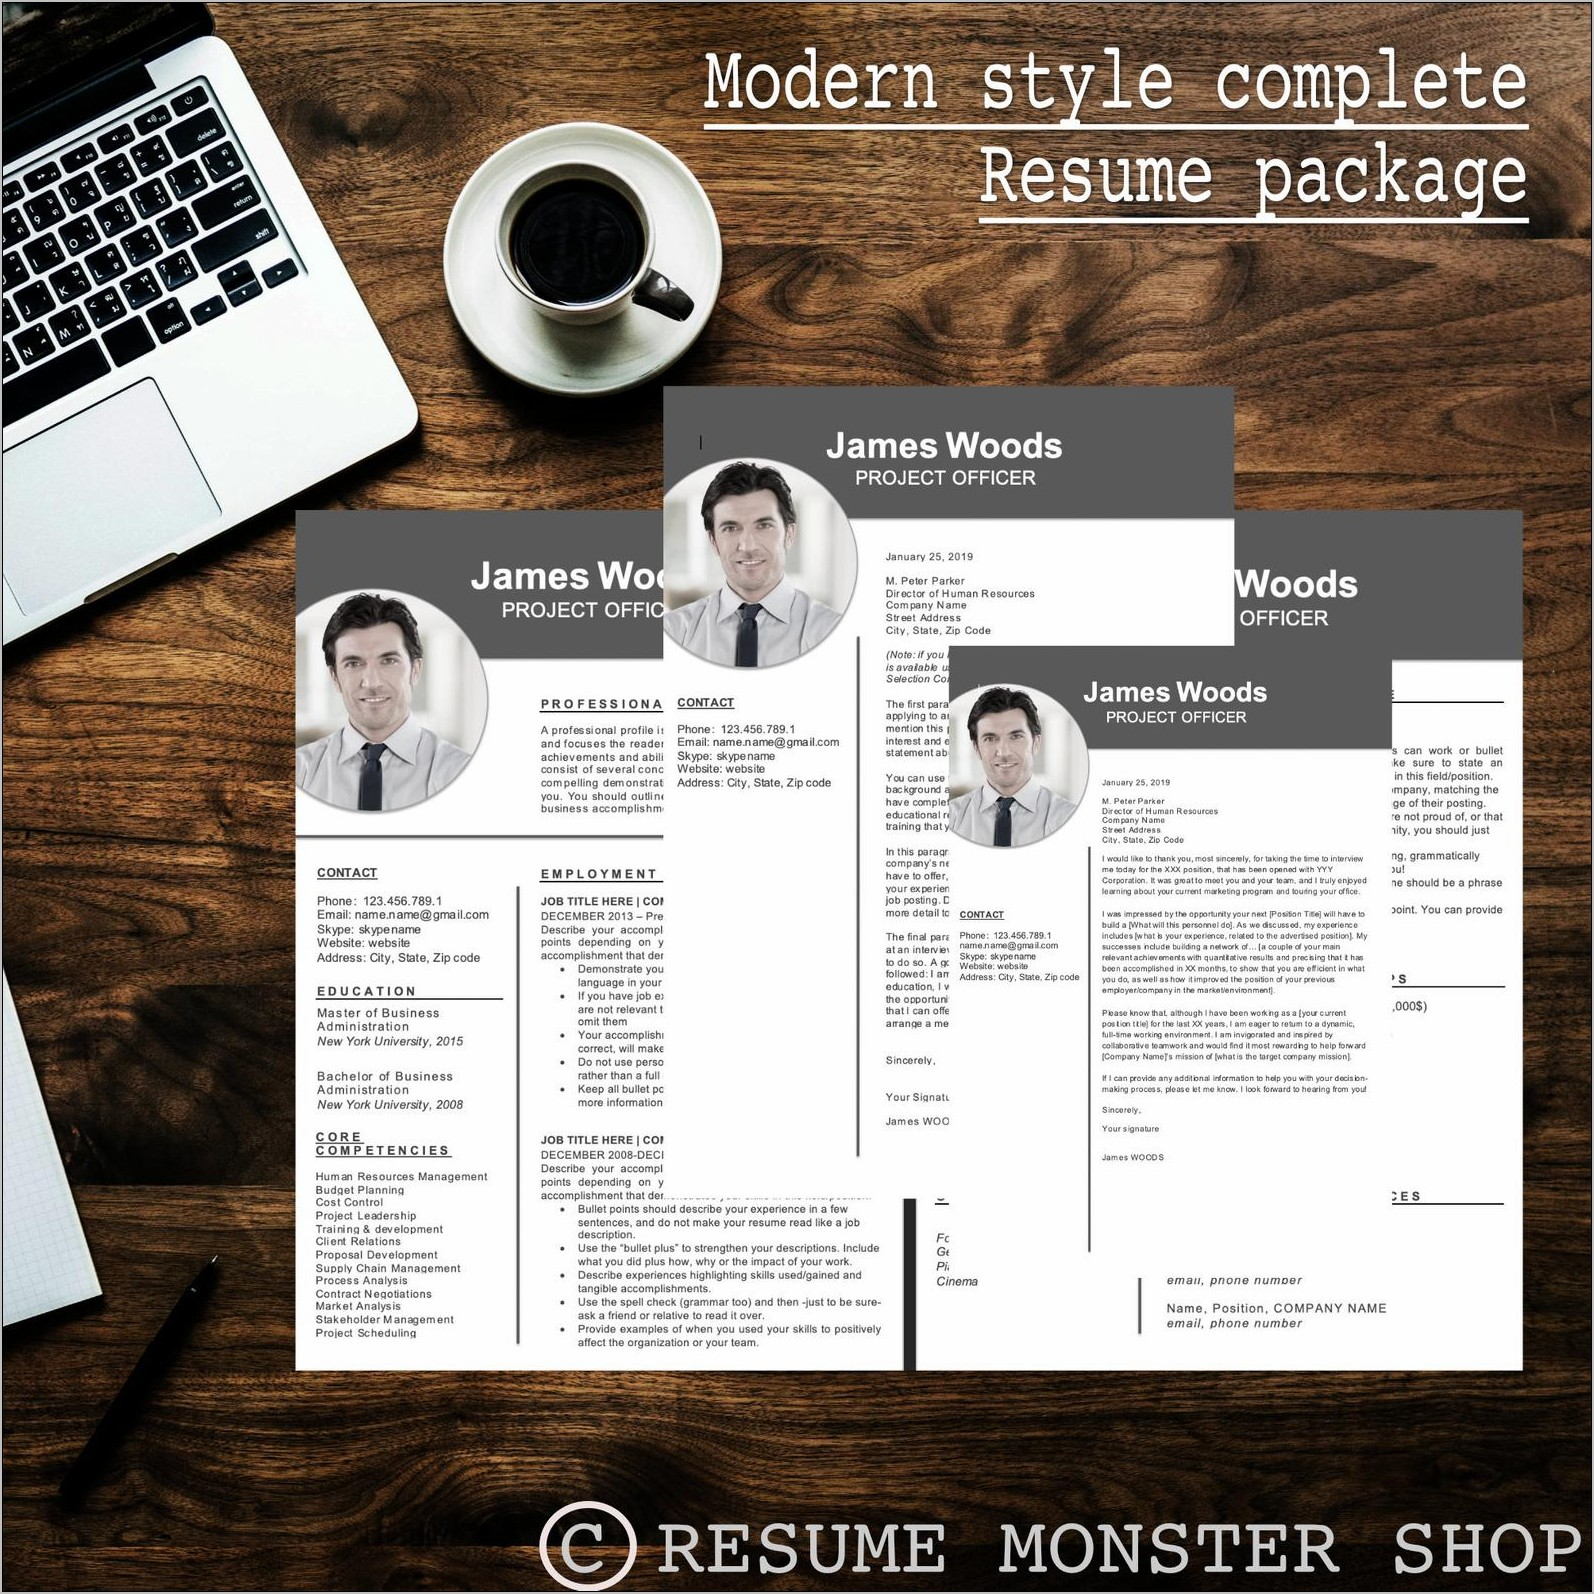 Project Manager Curriculum Vitae Template